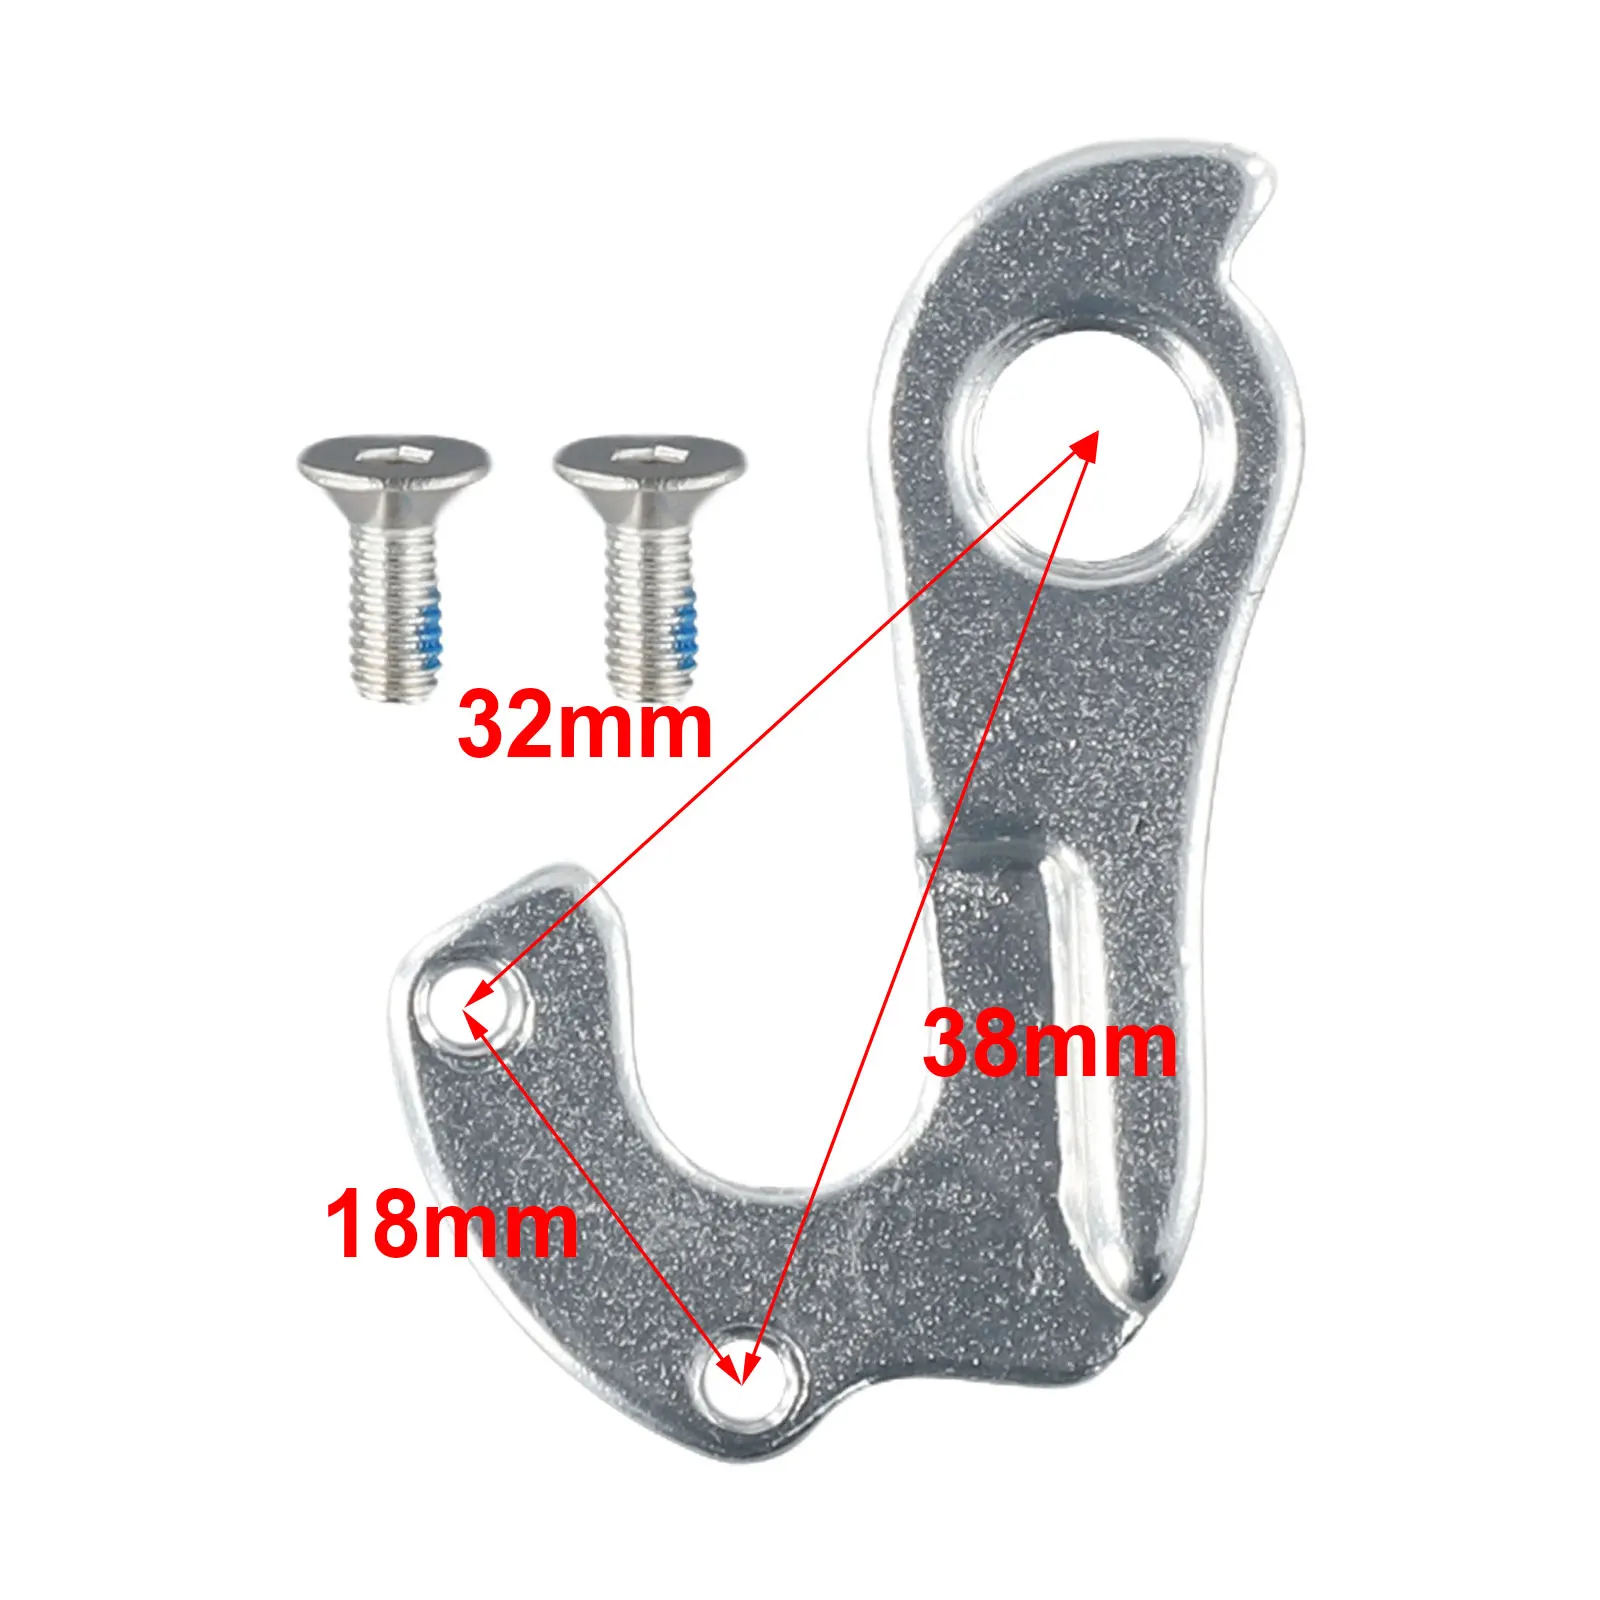 

Bike Rear Mech Derailleur Gear Hanger For Cube 1.0 2.0 5.0 6.0 Bicycle Tail Hook Extension Extender Cycling Accessories